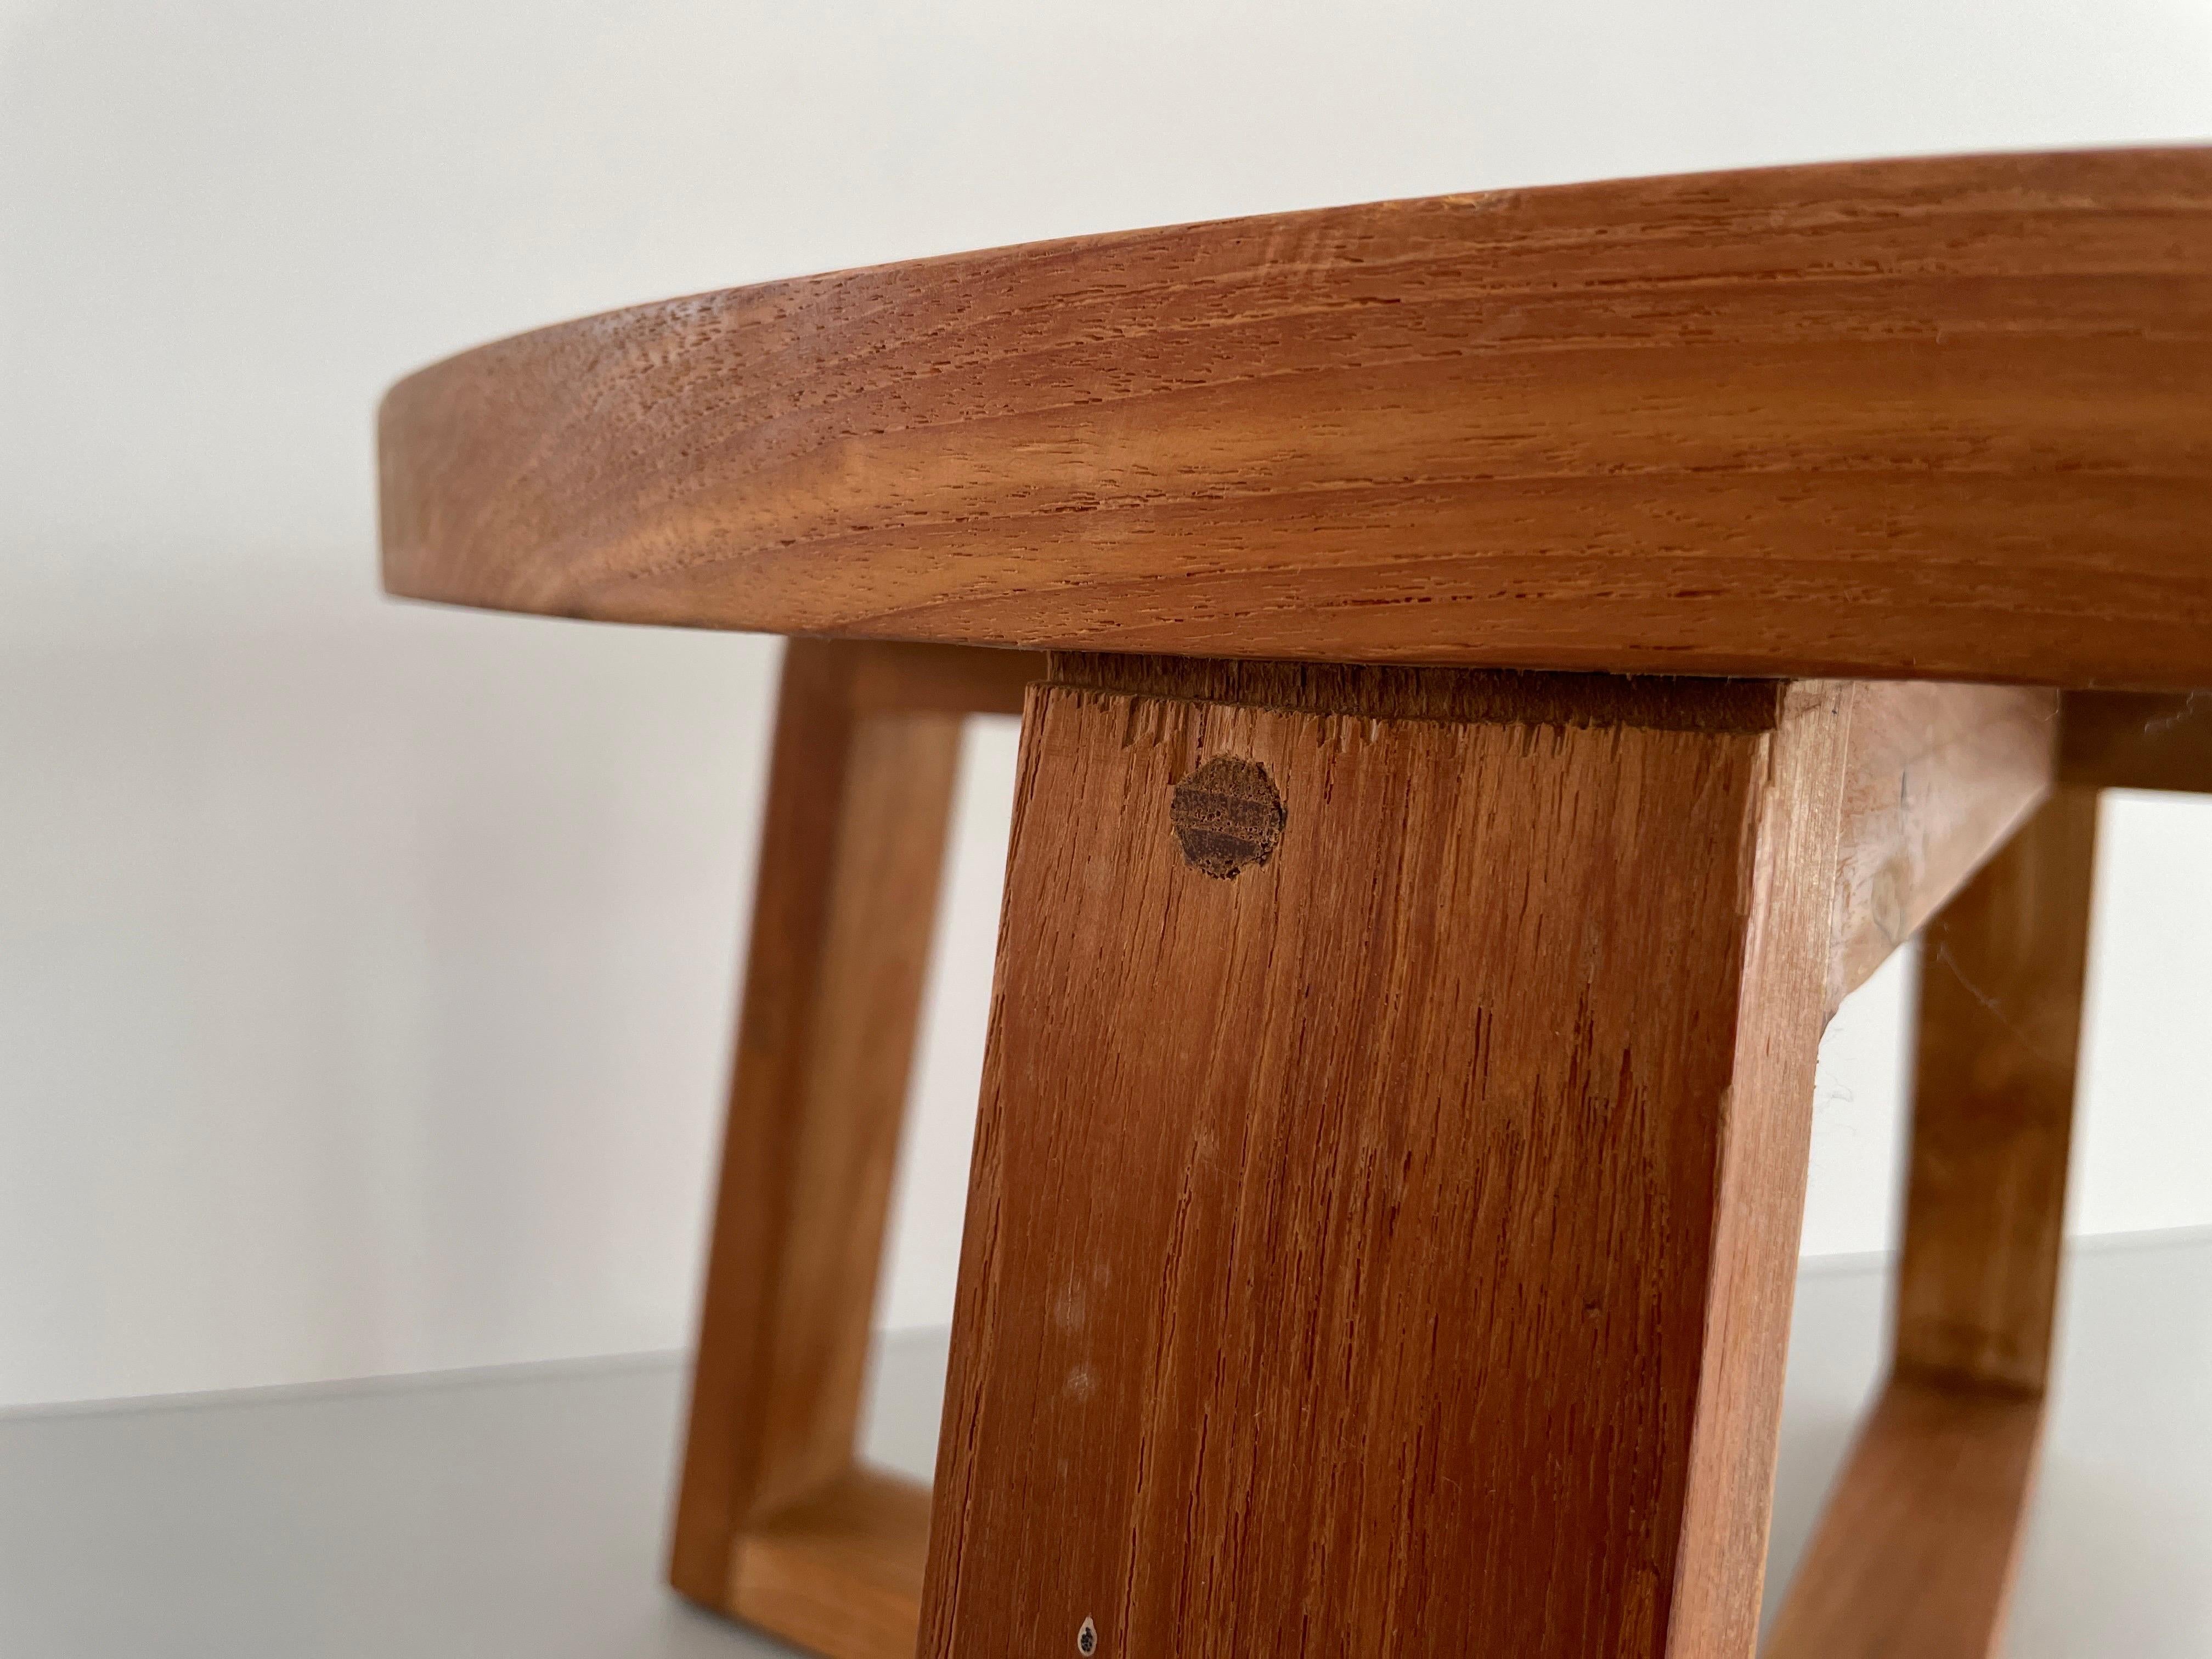 Minimalist Design Round Thick Wood Living Room Table, 1960s, Denmark 3